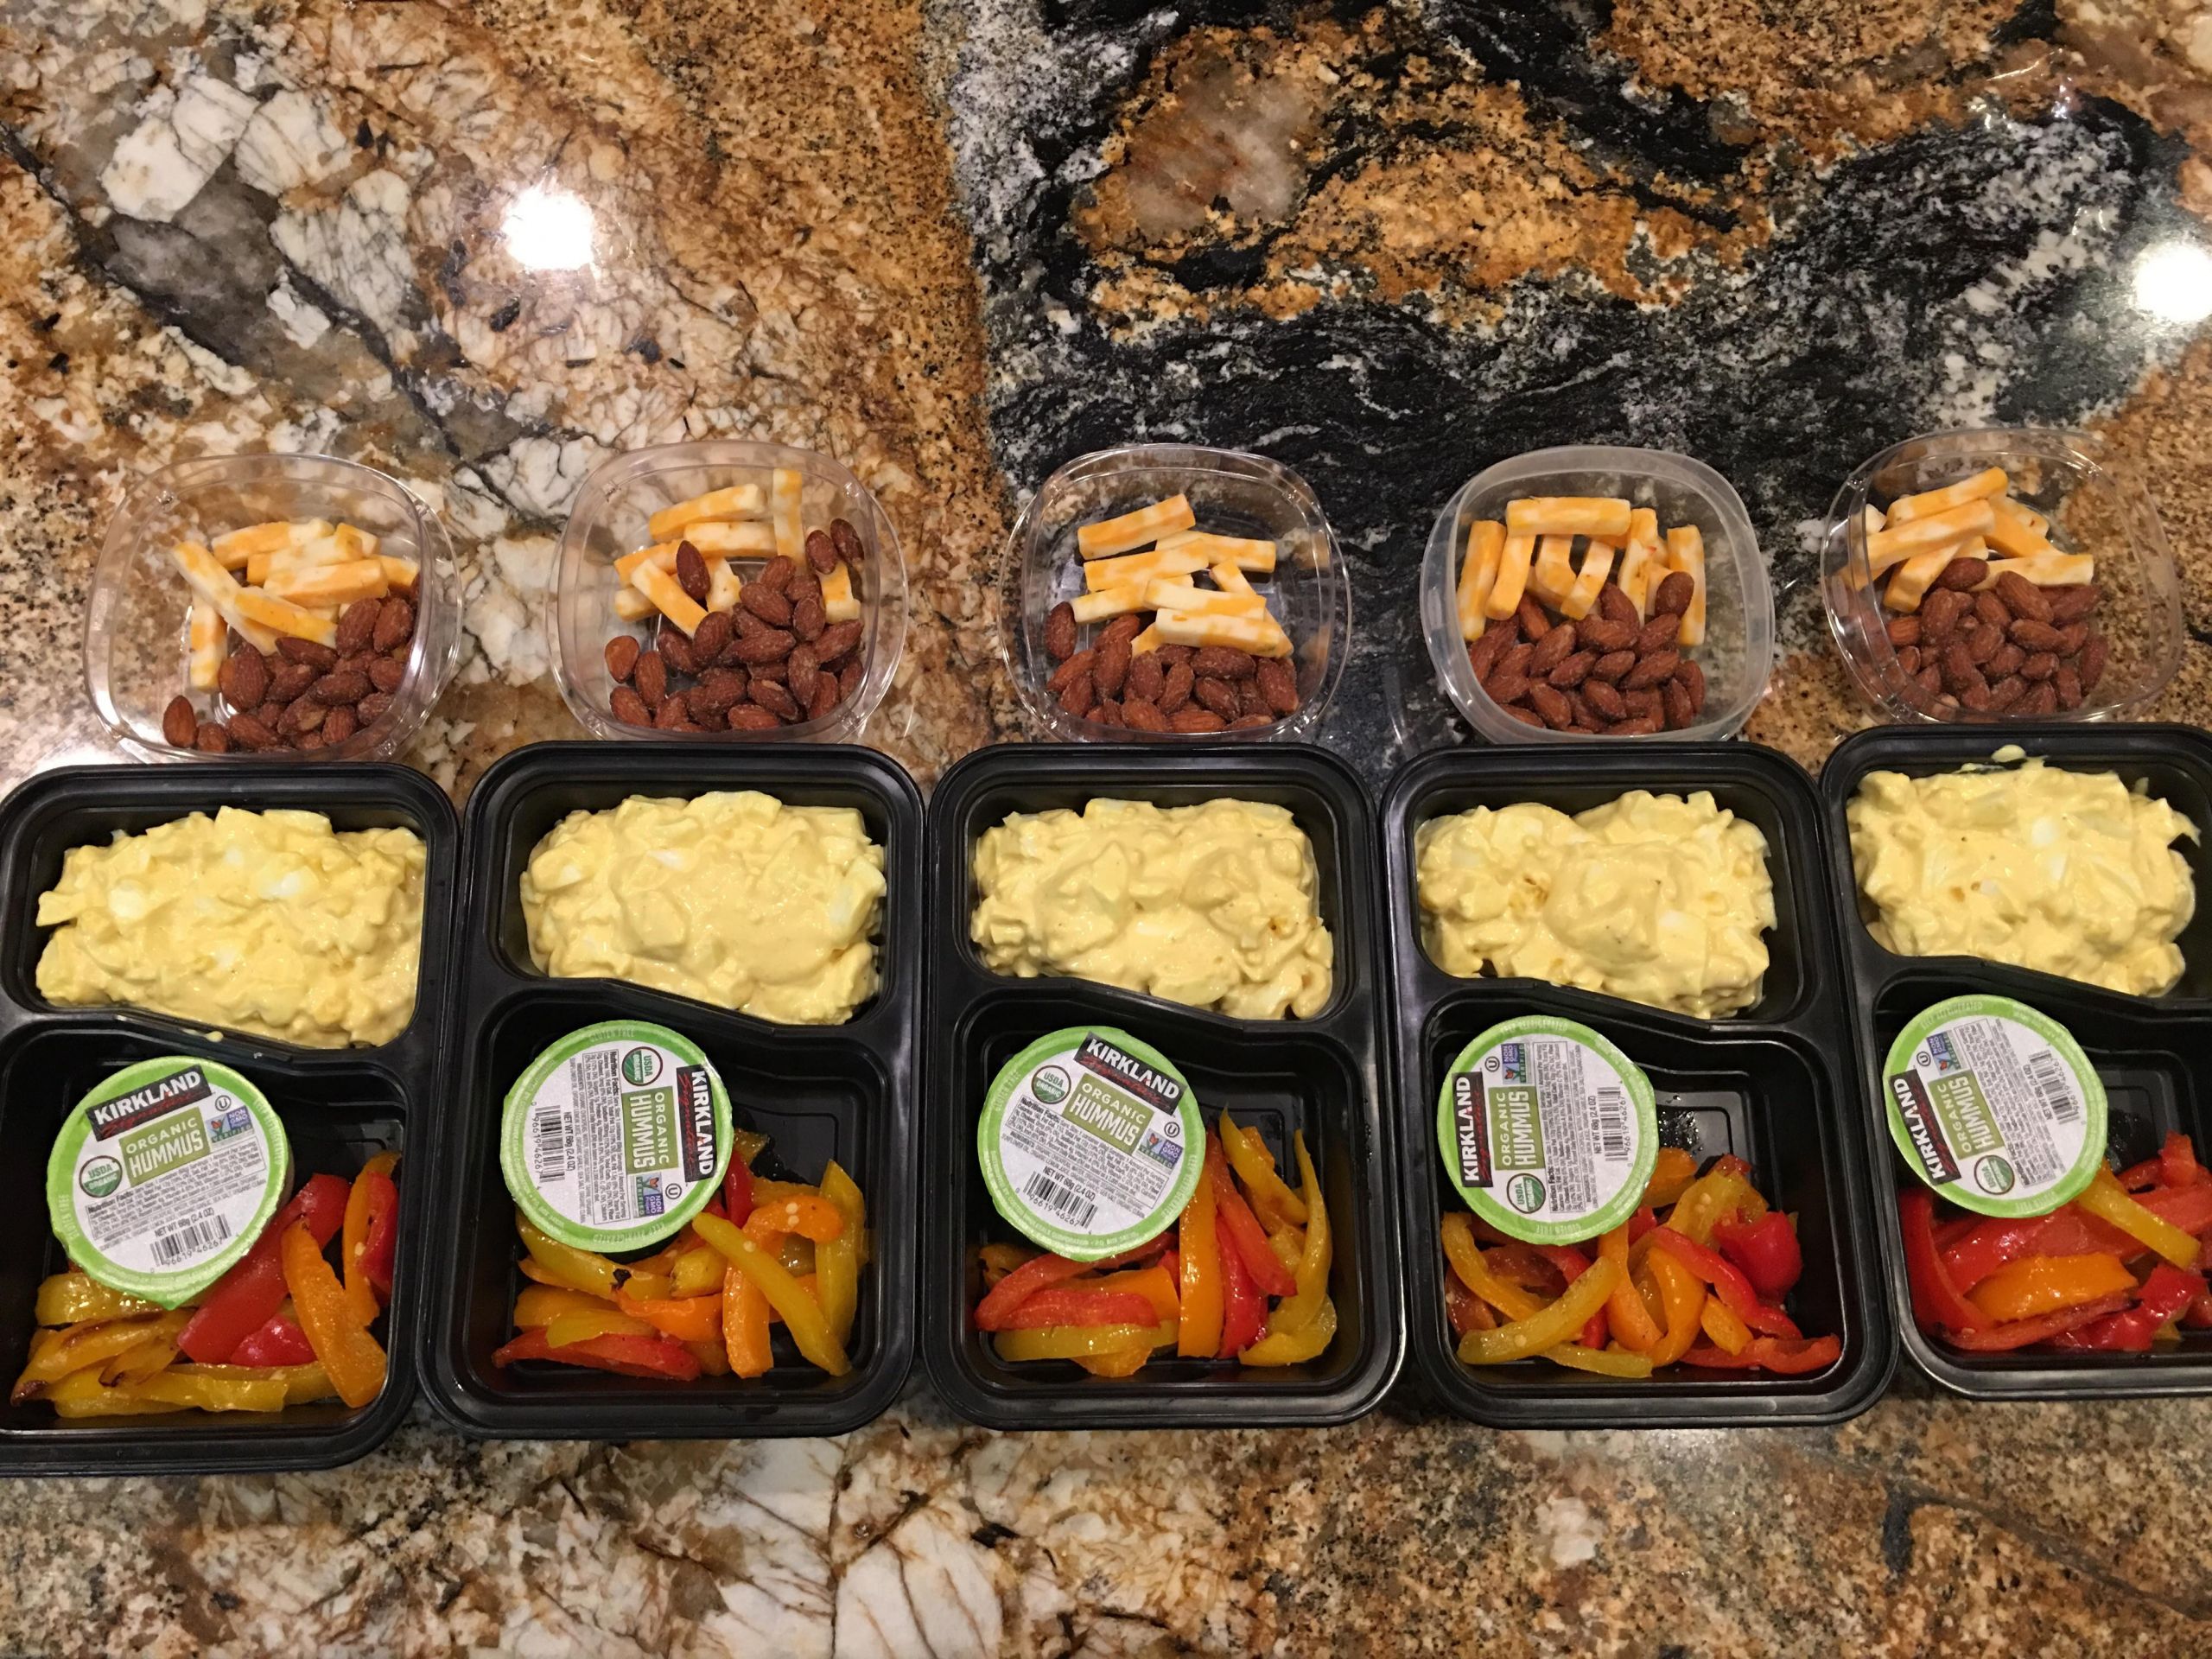 Vegetarian Keto Snacks
 Ve arian Keto Lunch and Snack about 13 net carbs total